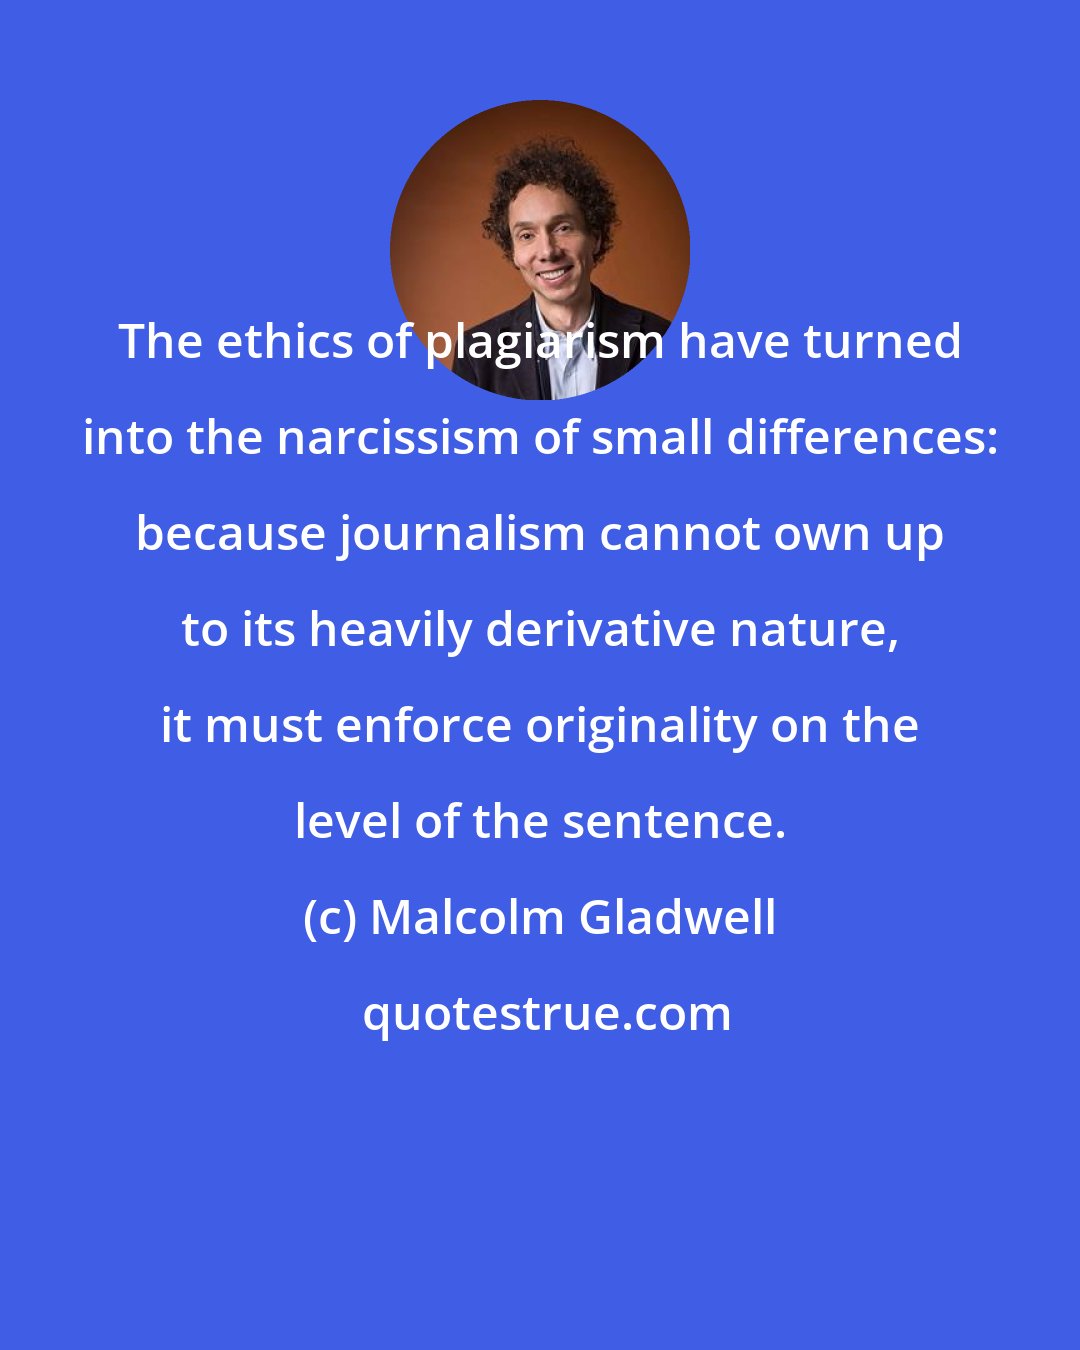 Malcolm Gladwell: The ethics of plagiarism have turned into the narcissism of small differences: because journalism cannot own up to its heavily derivative nature, it must enforce originality on the level of the sentence.